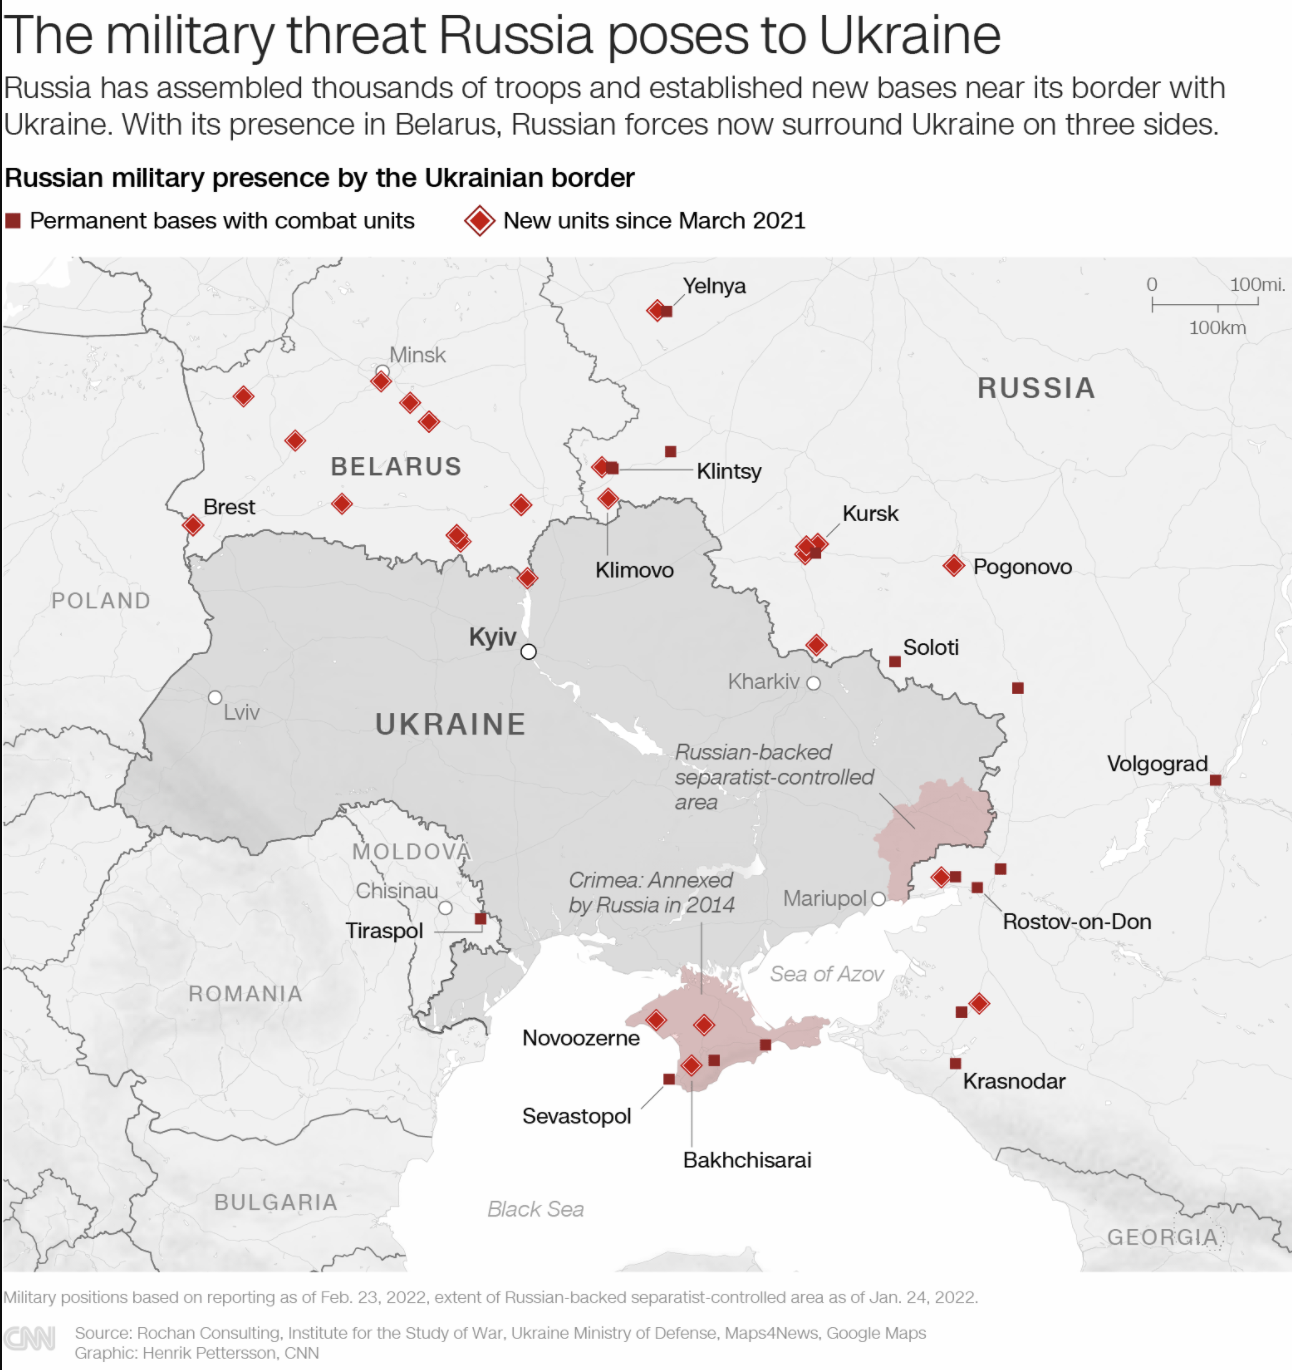 Russia has surrounded Ukraine from three sides